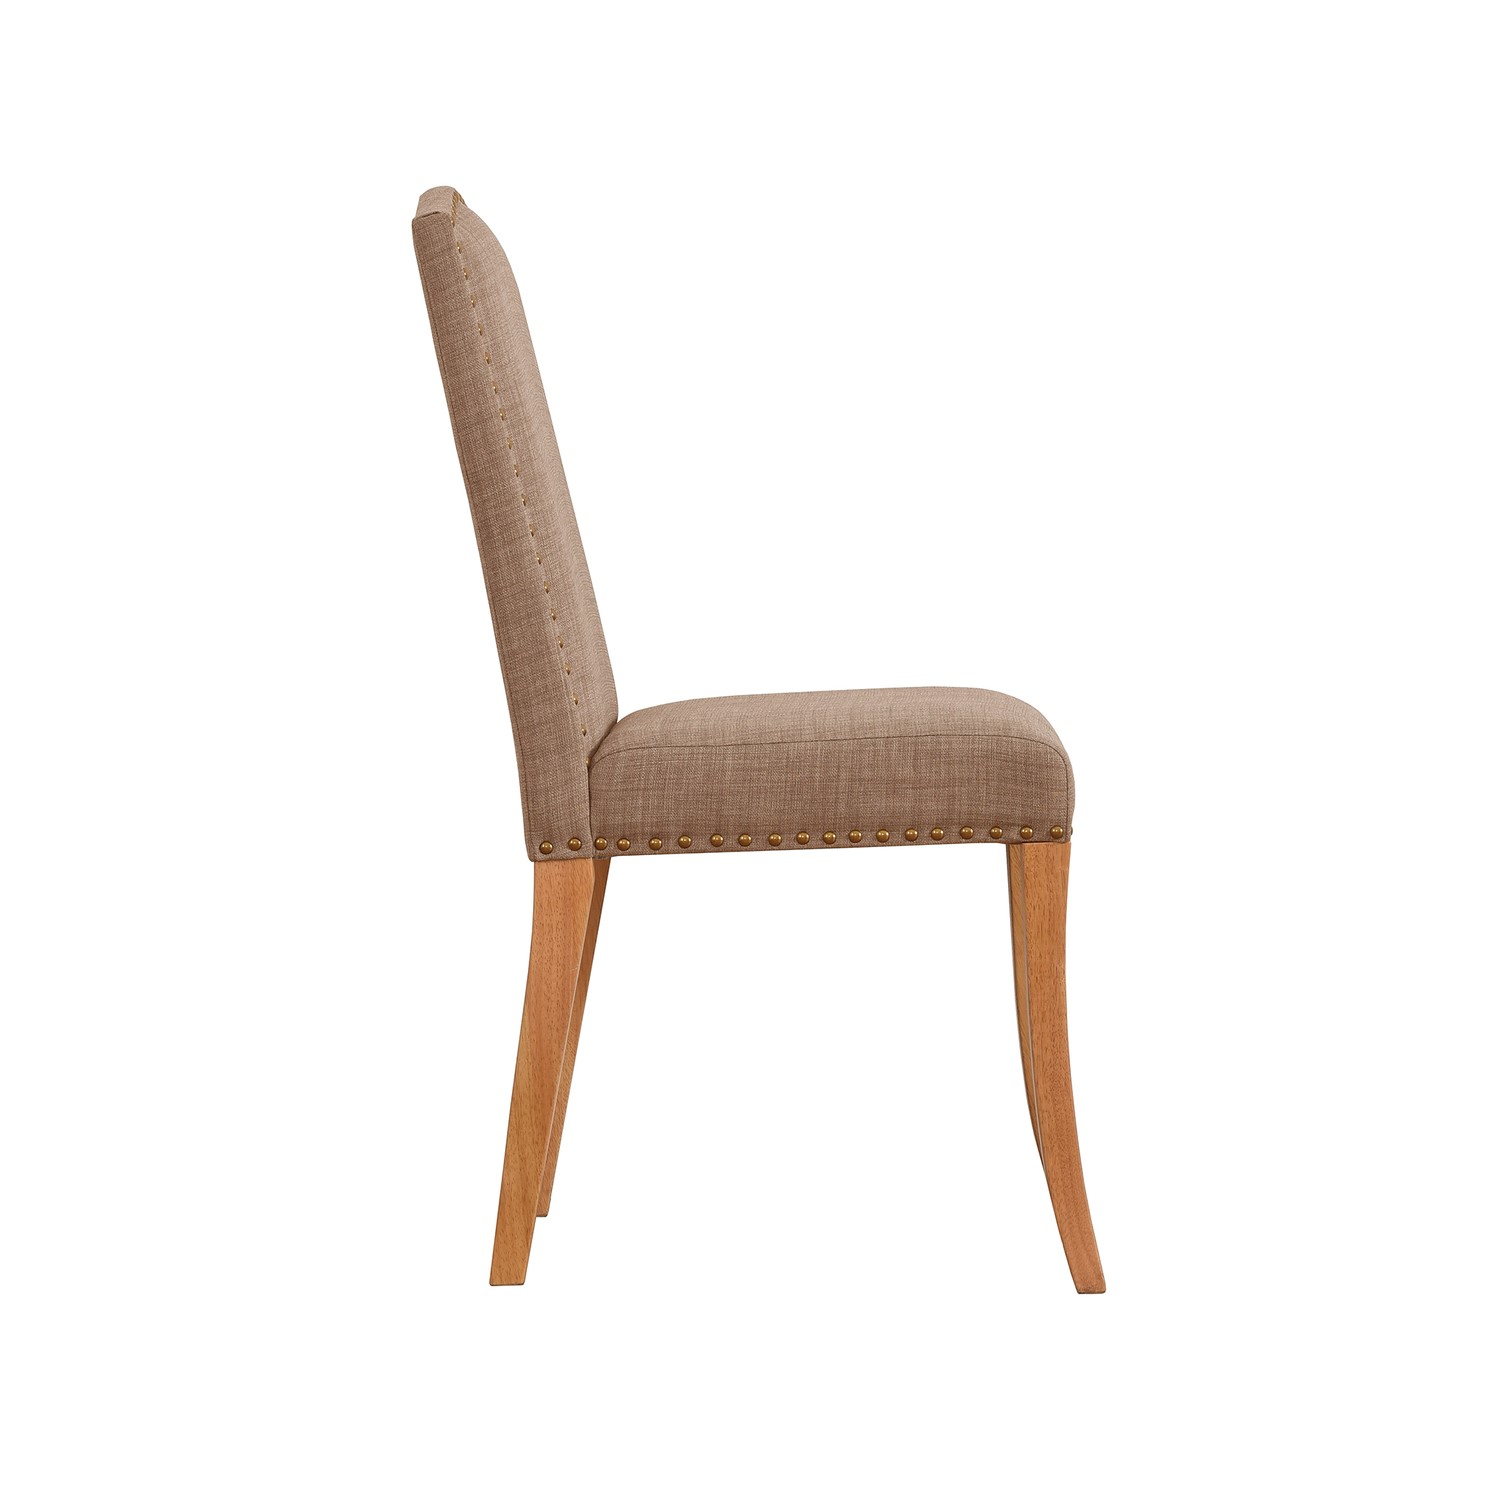 GRADE A1 - Evesham Pair of Beige Dining Chairs with Classic Stud Detail ...